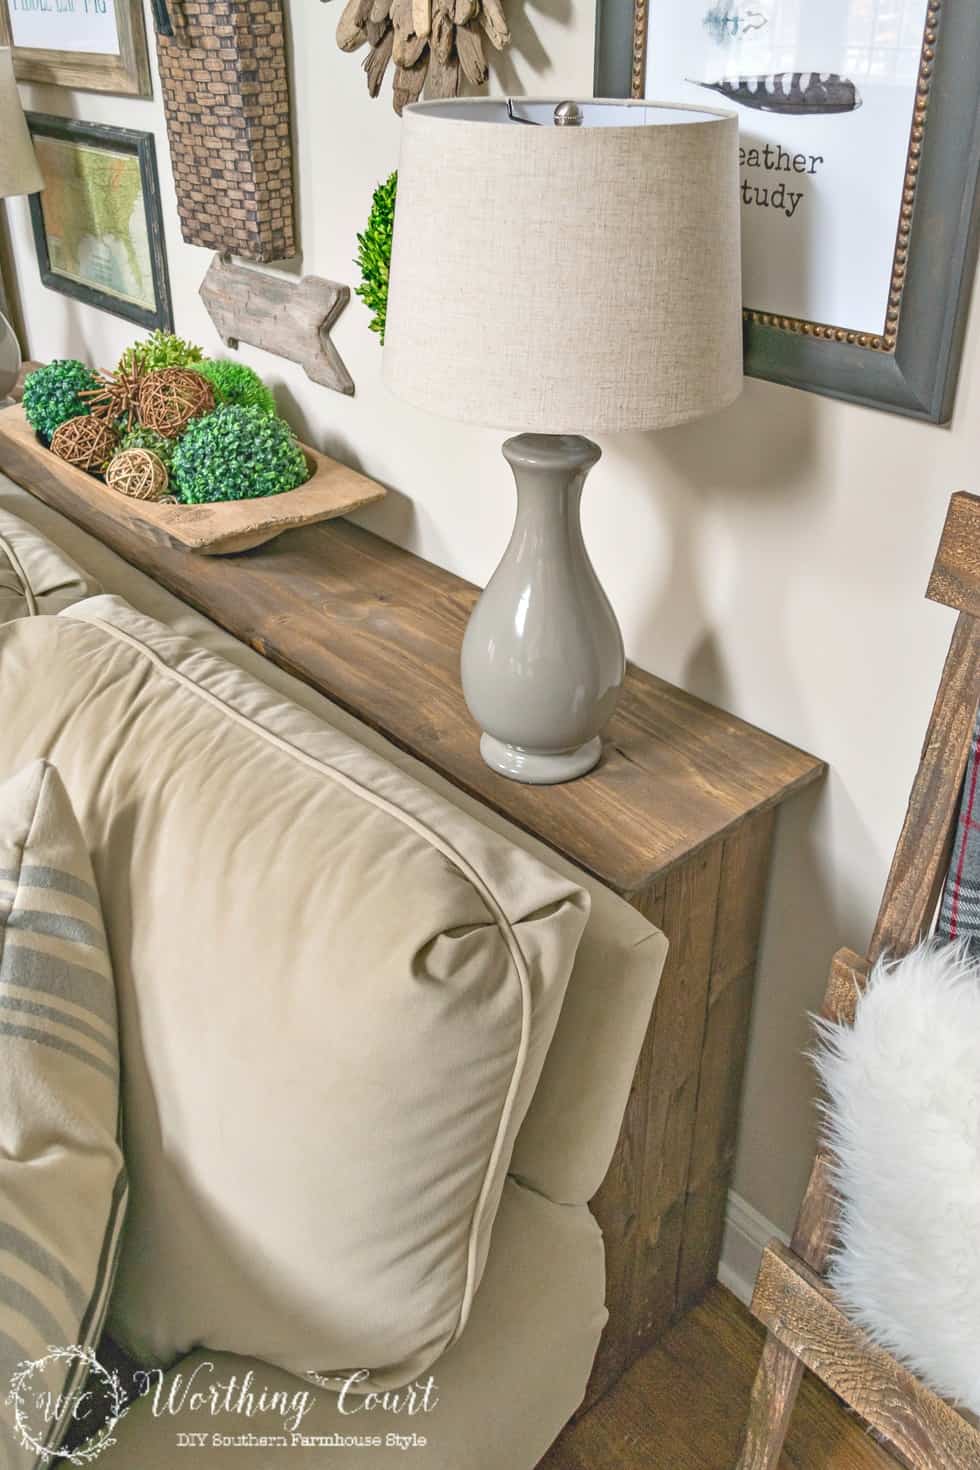 How To Build A Rustic Sofa Table   Worthing Court   DIY Home Decor ...